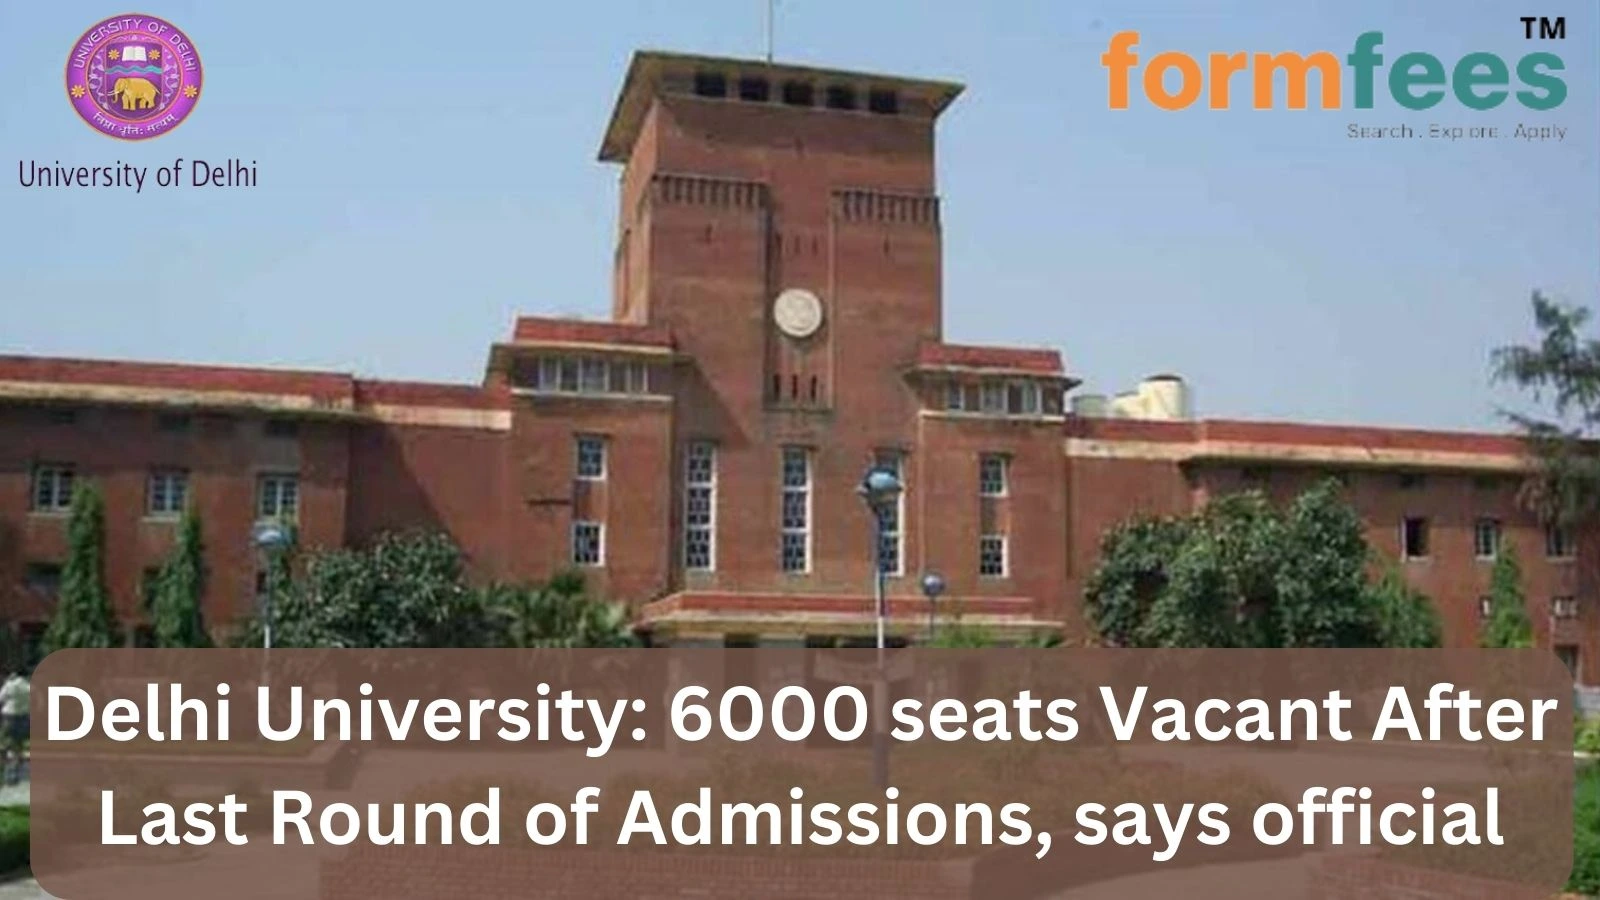 Delhi University: 6000 seats Vacant After Last Round of Admissions, says official